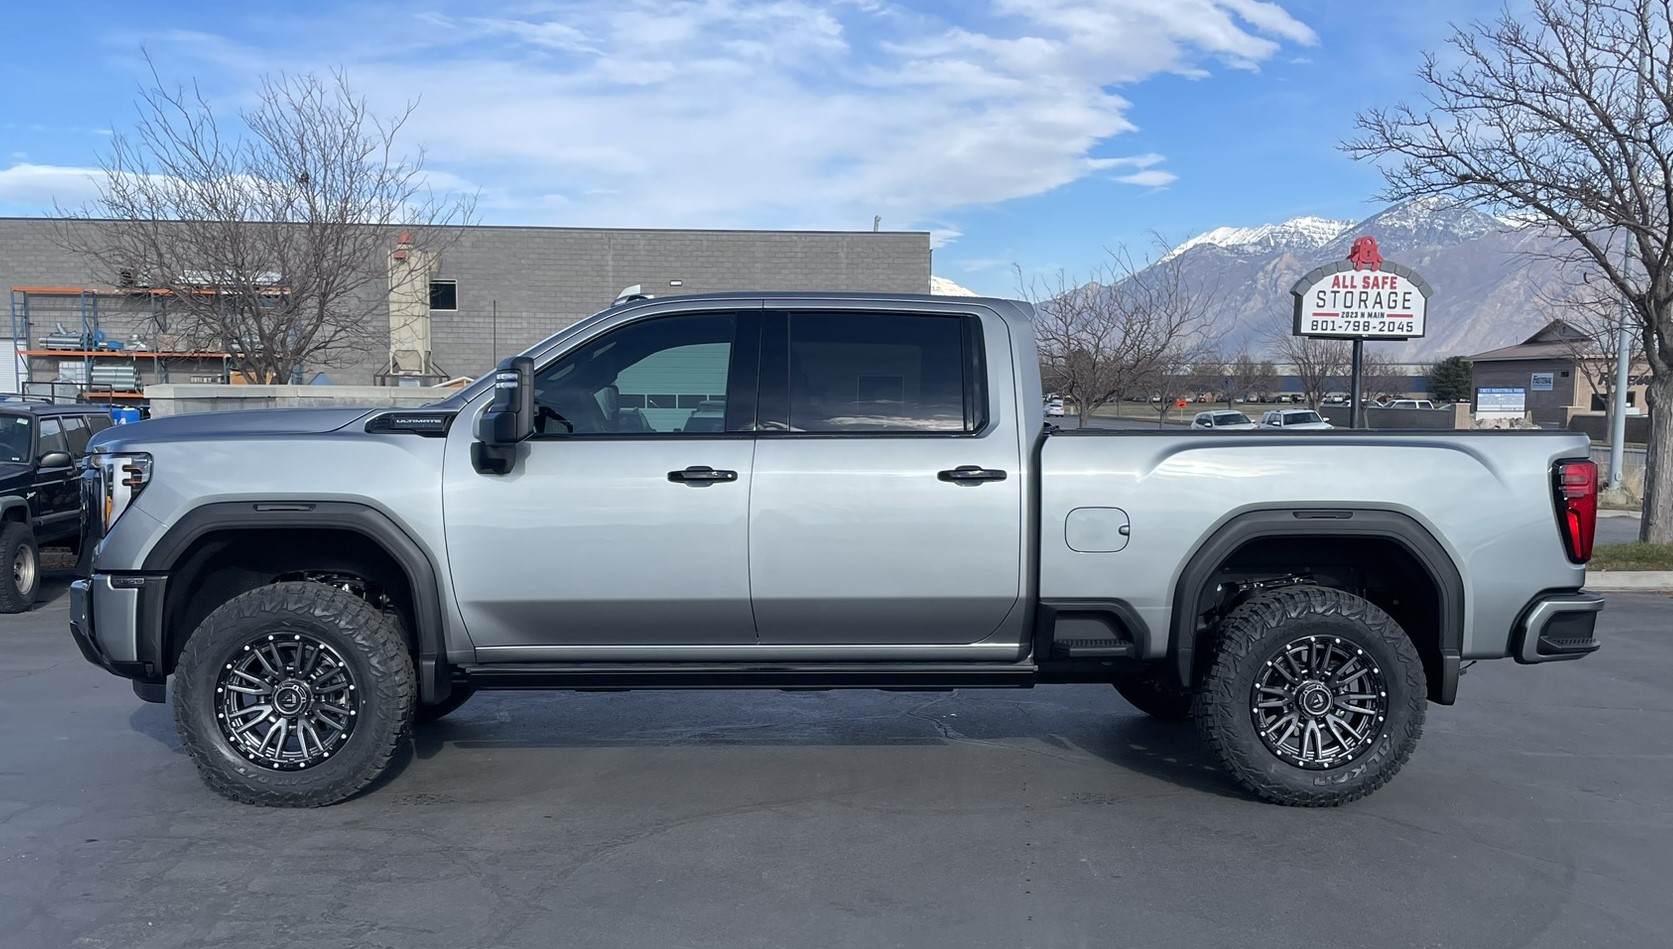  Elevate Your Truck: The Complete Guide to Adding Leveling Kits and Suspension Lifts